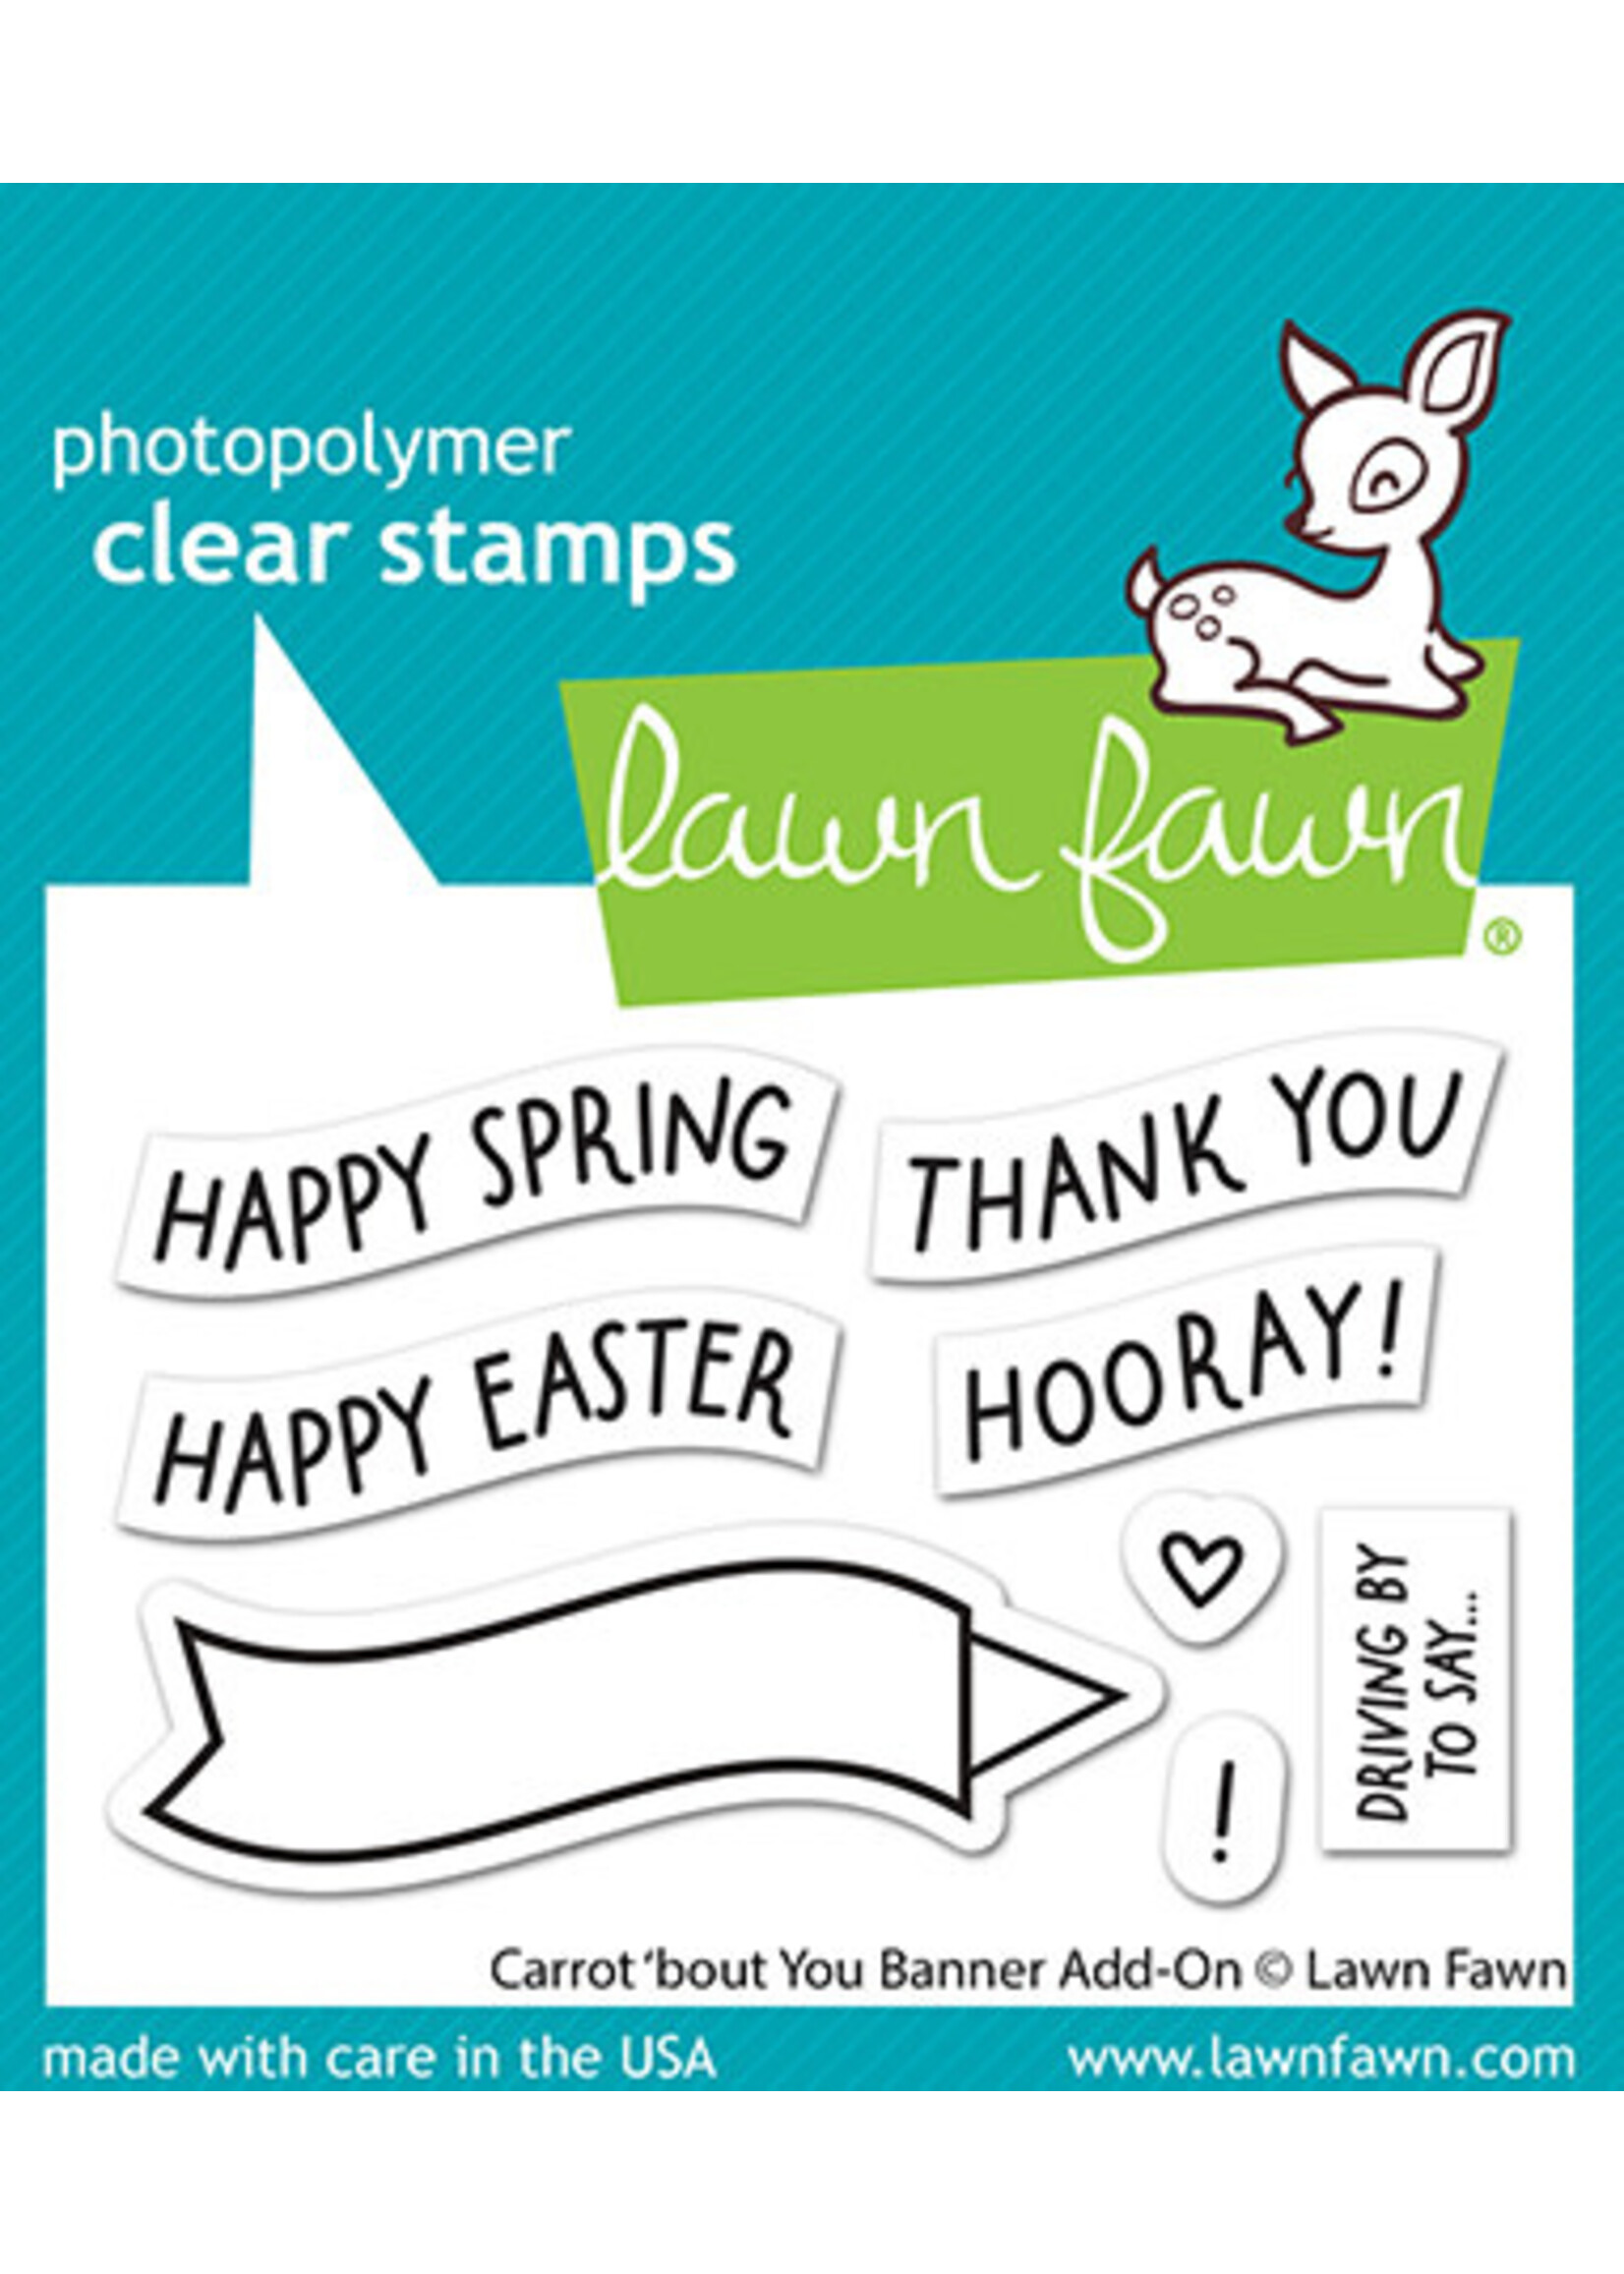 Lawn Fawn carrot 'bout you banner add-on stamp & die bundle